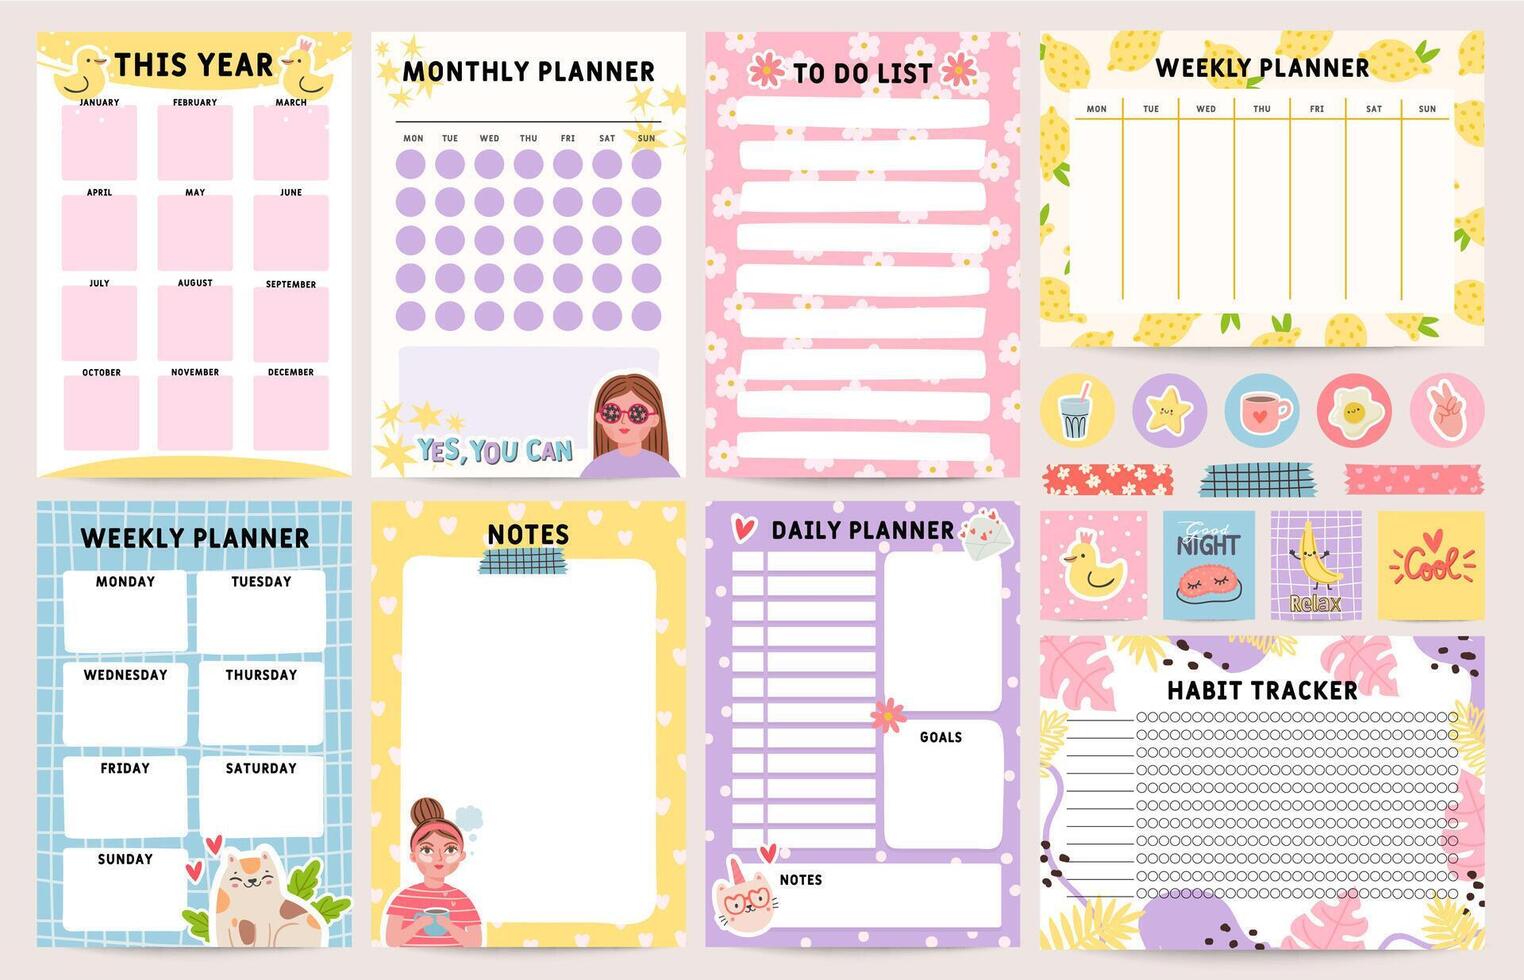 Planner notebook. Decorated daily, monthly and weekly plan template. To do list, schedule and habit tracker. Organizer note pages vector set